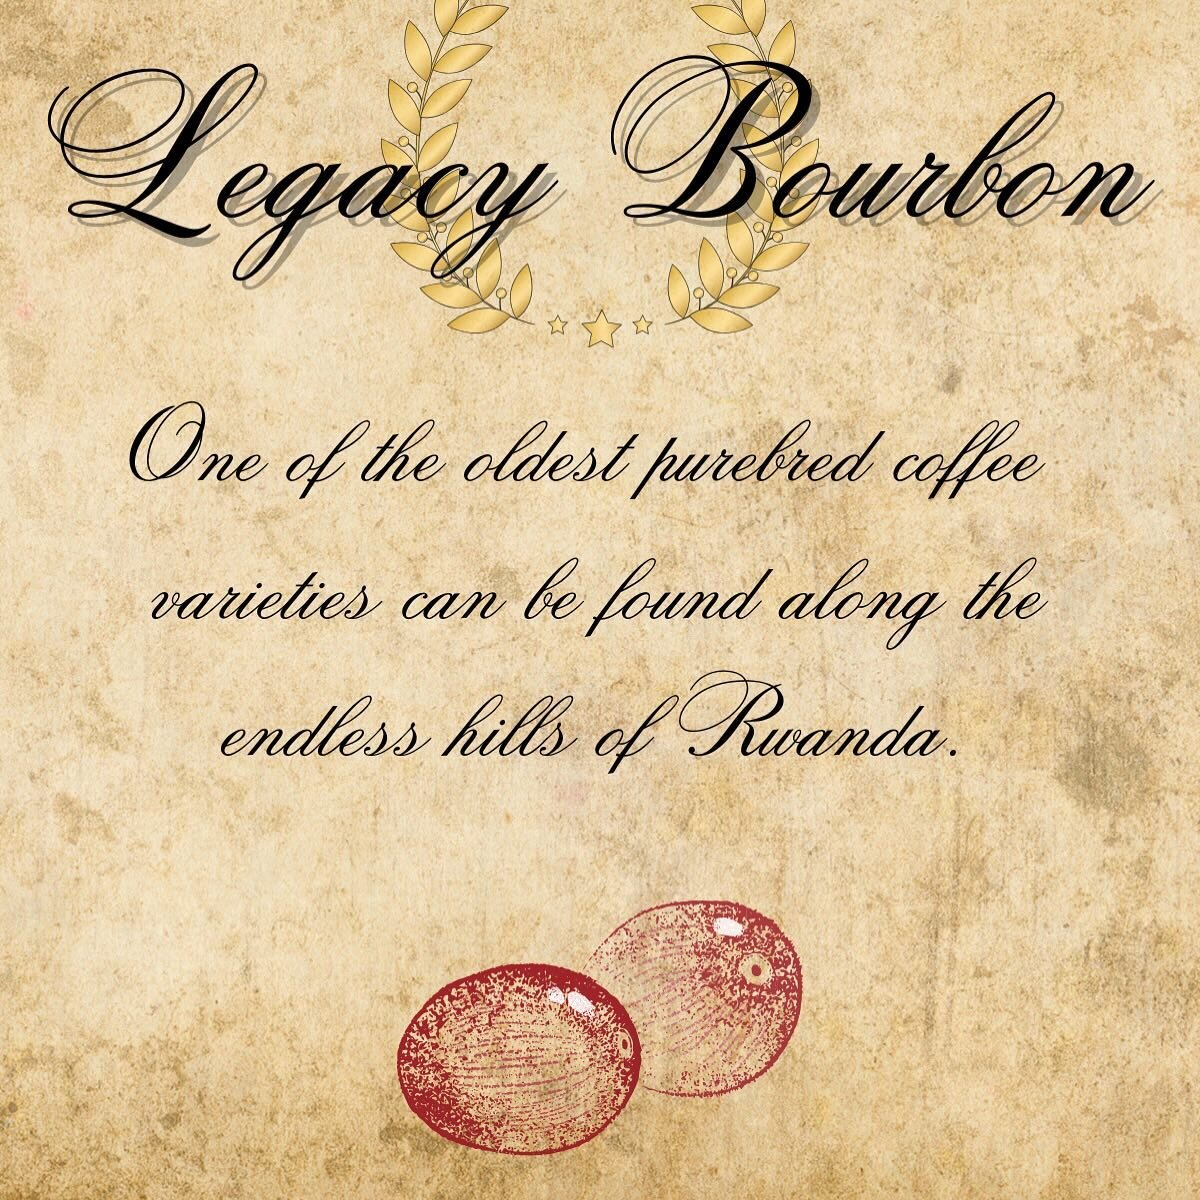 Great coffee deserves a great story! Let us introduce our latest release: &ldquo;Legacy Bourbon&rdquo;.

Did you know most coffee varieties we have today are the result of just 1/60 coffee plants surviving its journey from Yemen to Bourbon Island? Mo